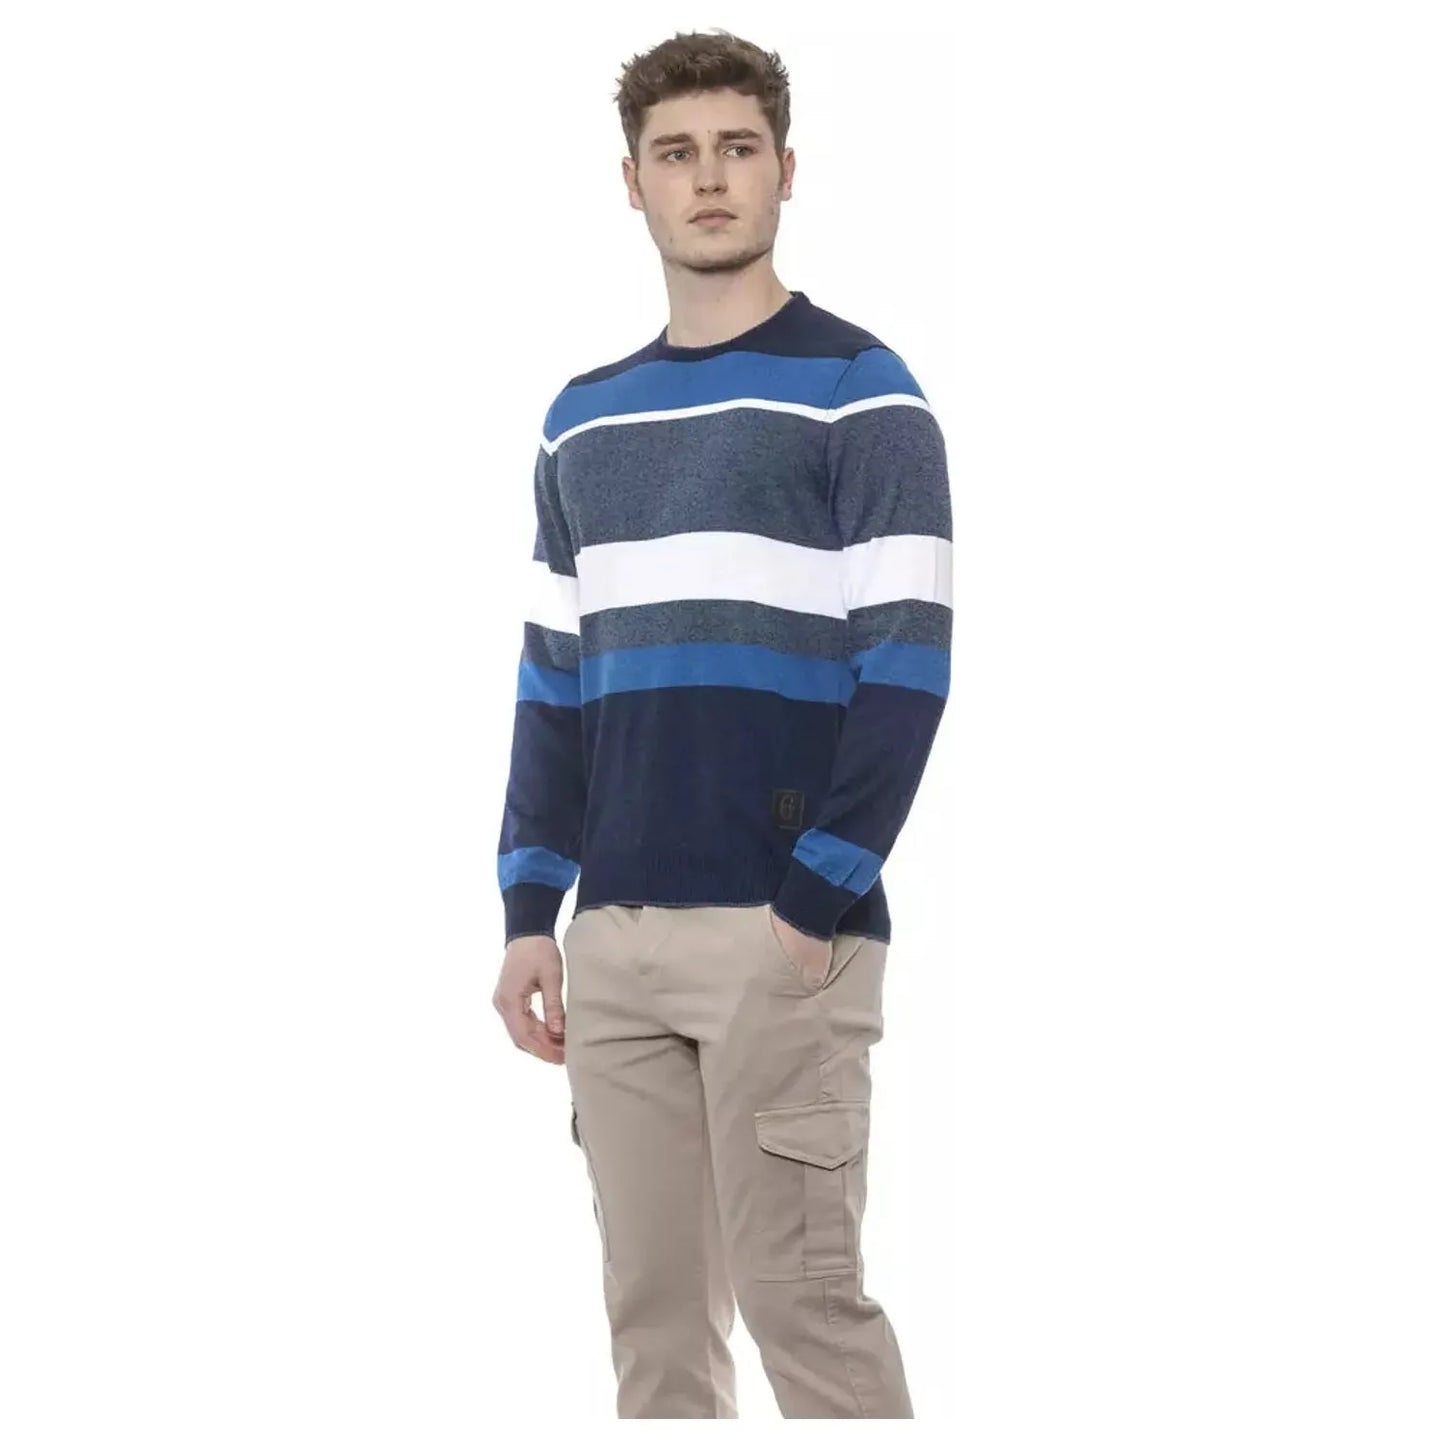 Conte of Florence Elegant Striped Crewneck Sweater in Blue prussianblue-sweater-4 stock_product_image_20327_1886172149-18-aed427e4-2fc.webp